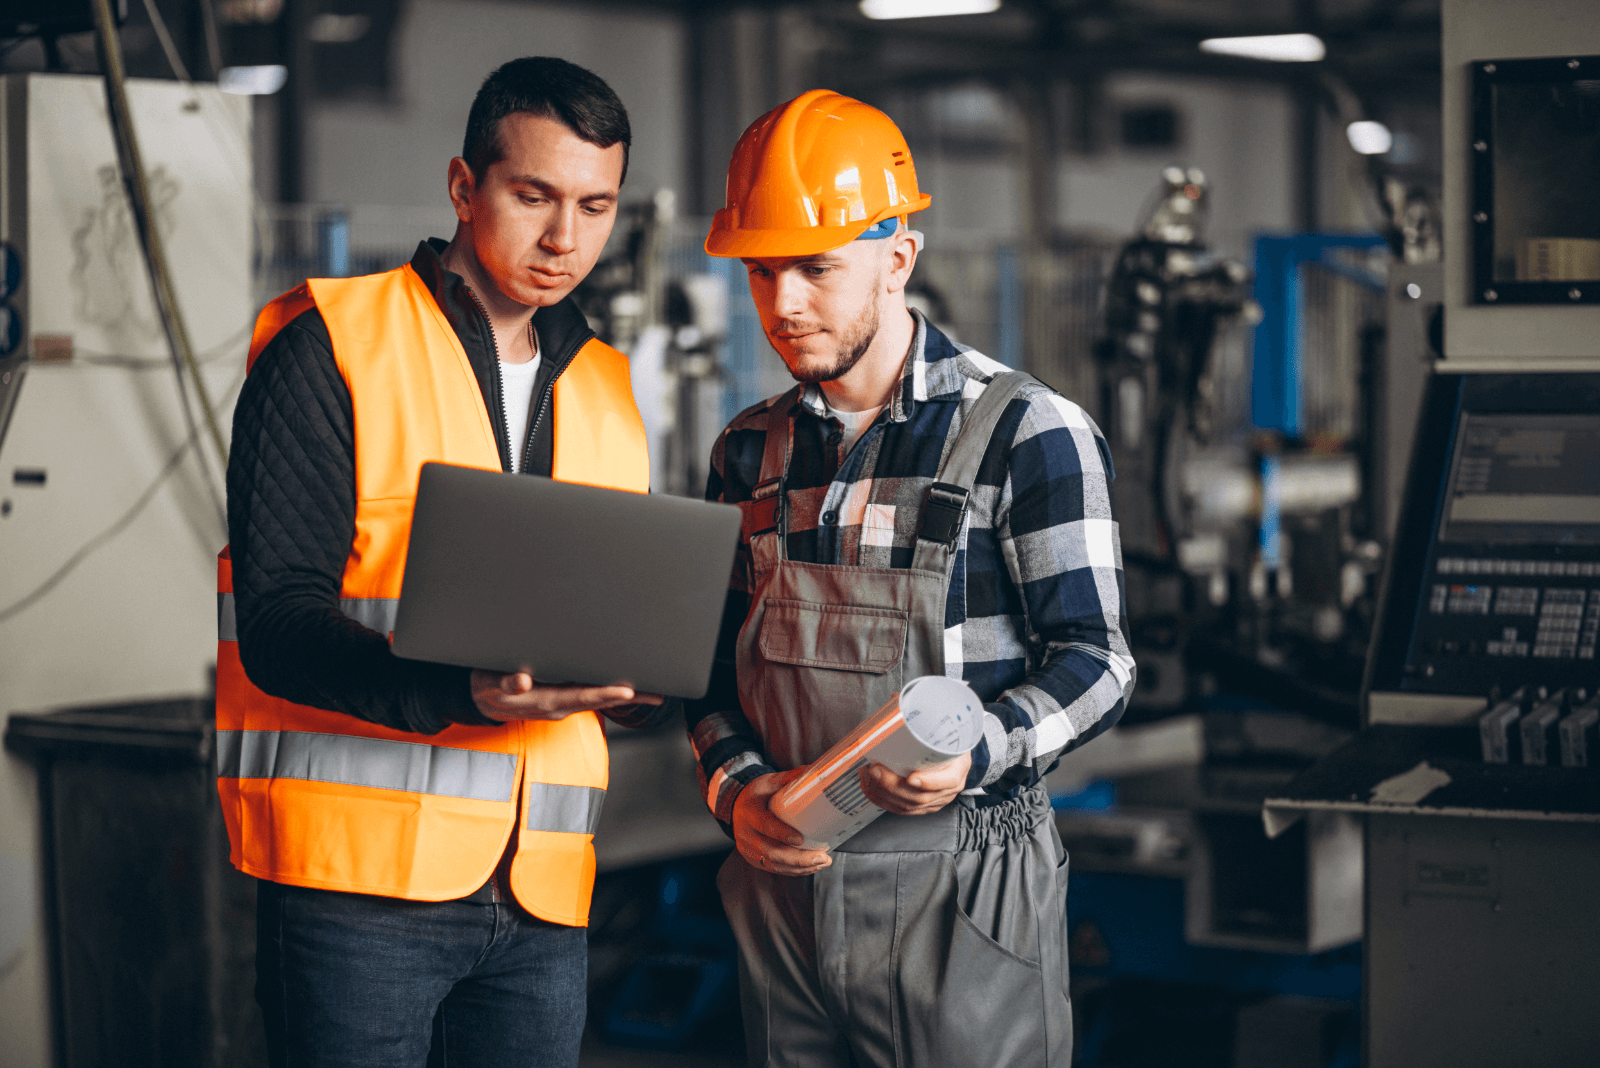 What's the Importance of Workplace Safety Training